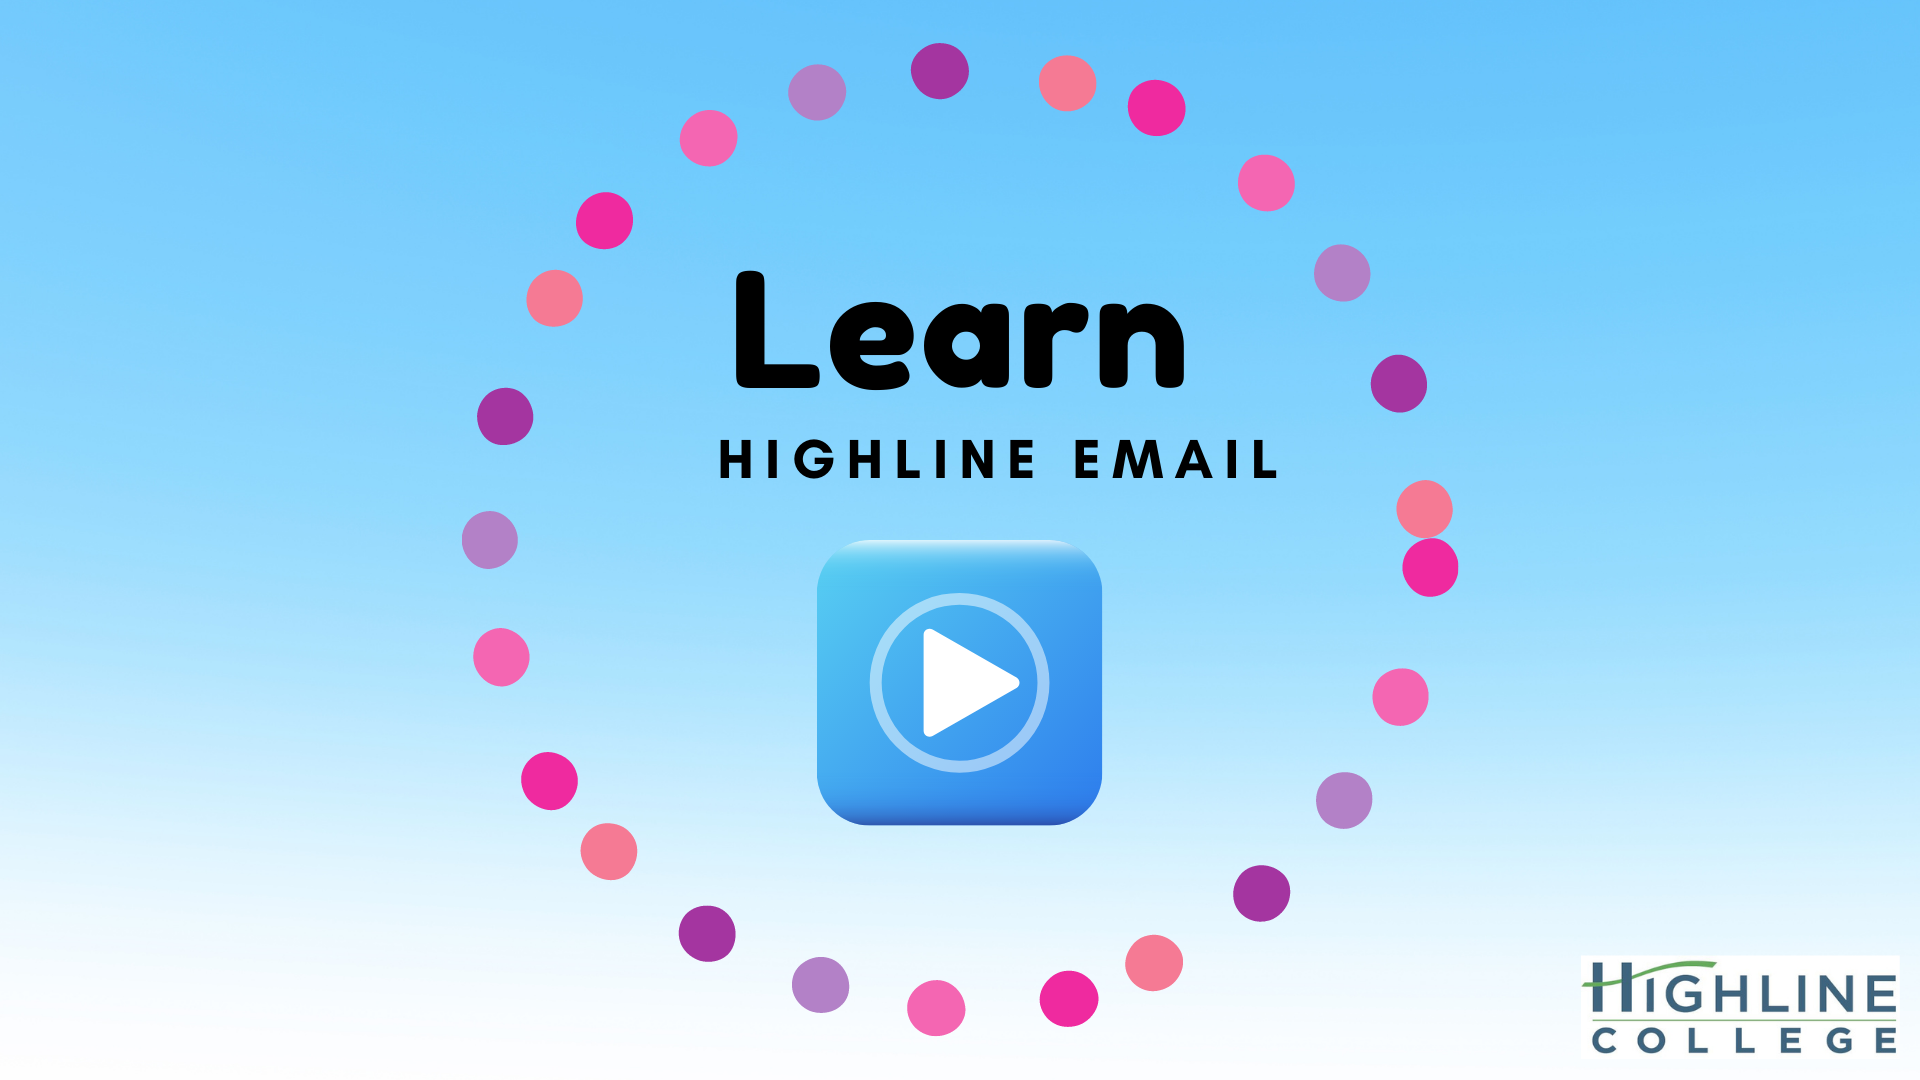 Learn about your Highline email